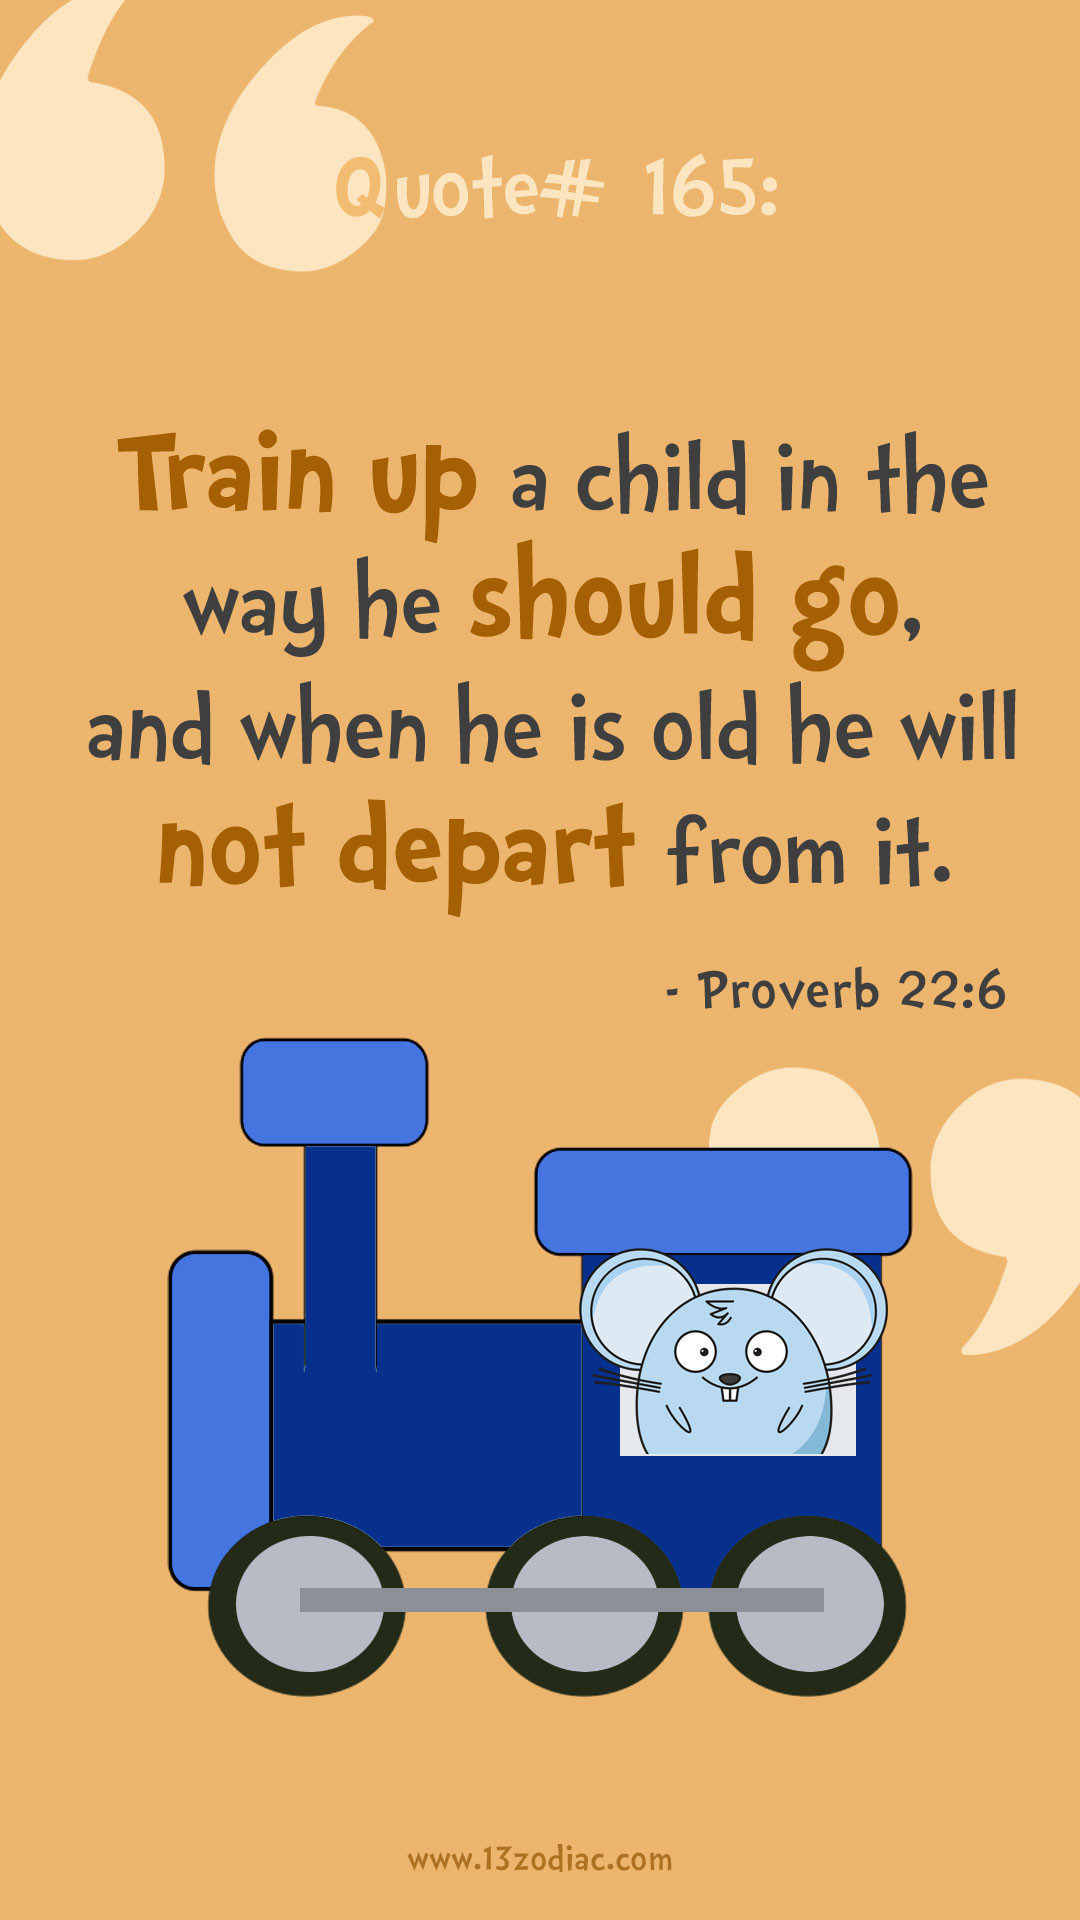 Train A Child Quote
 Quote 165 Train up a child in the way he should go and